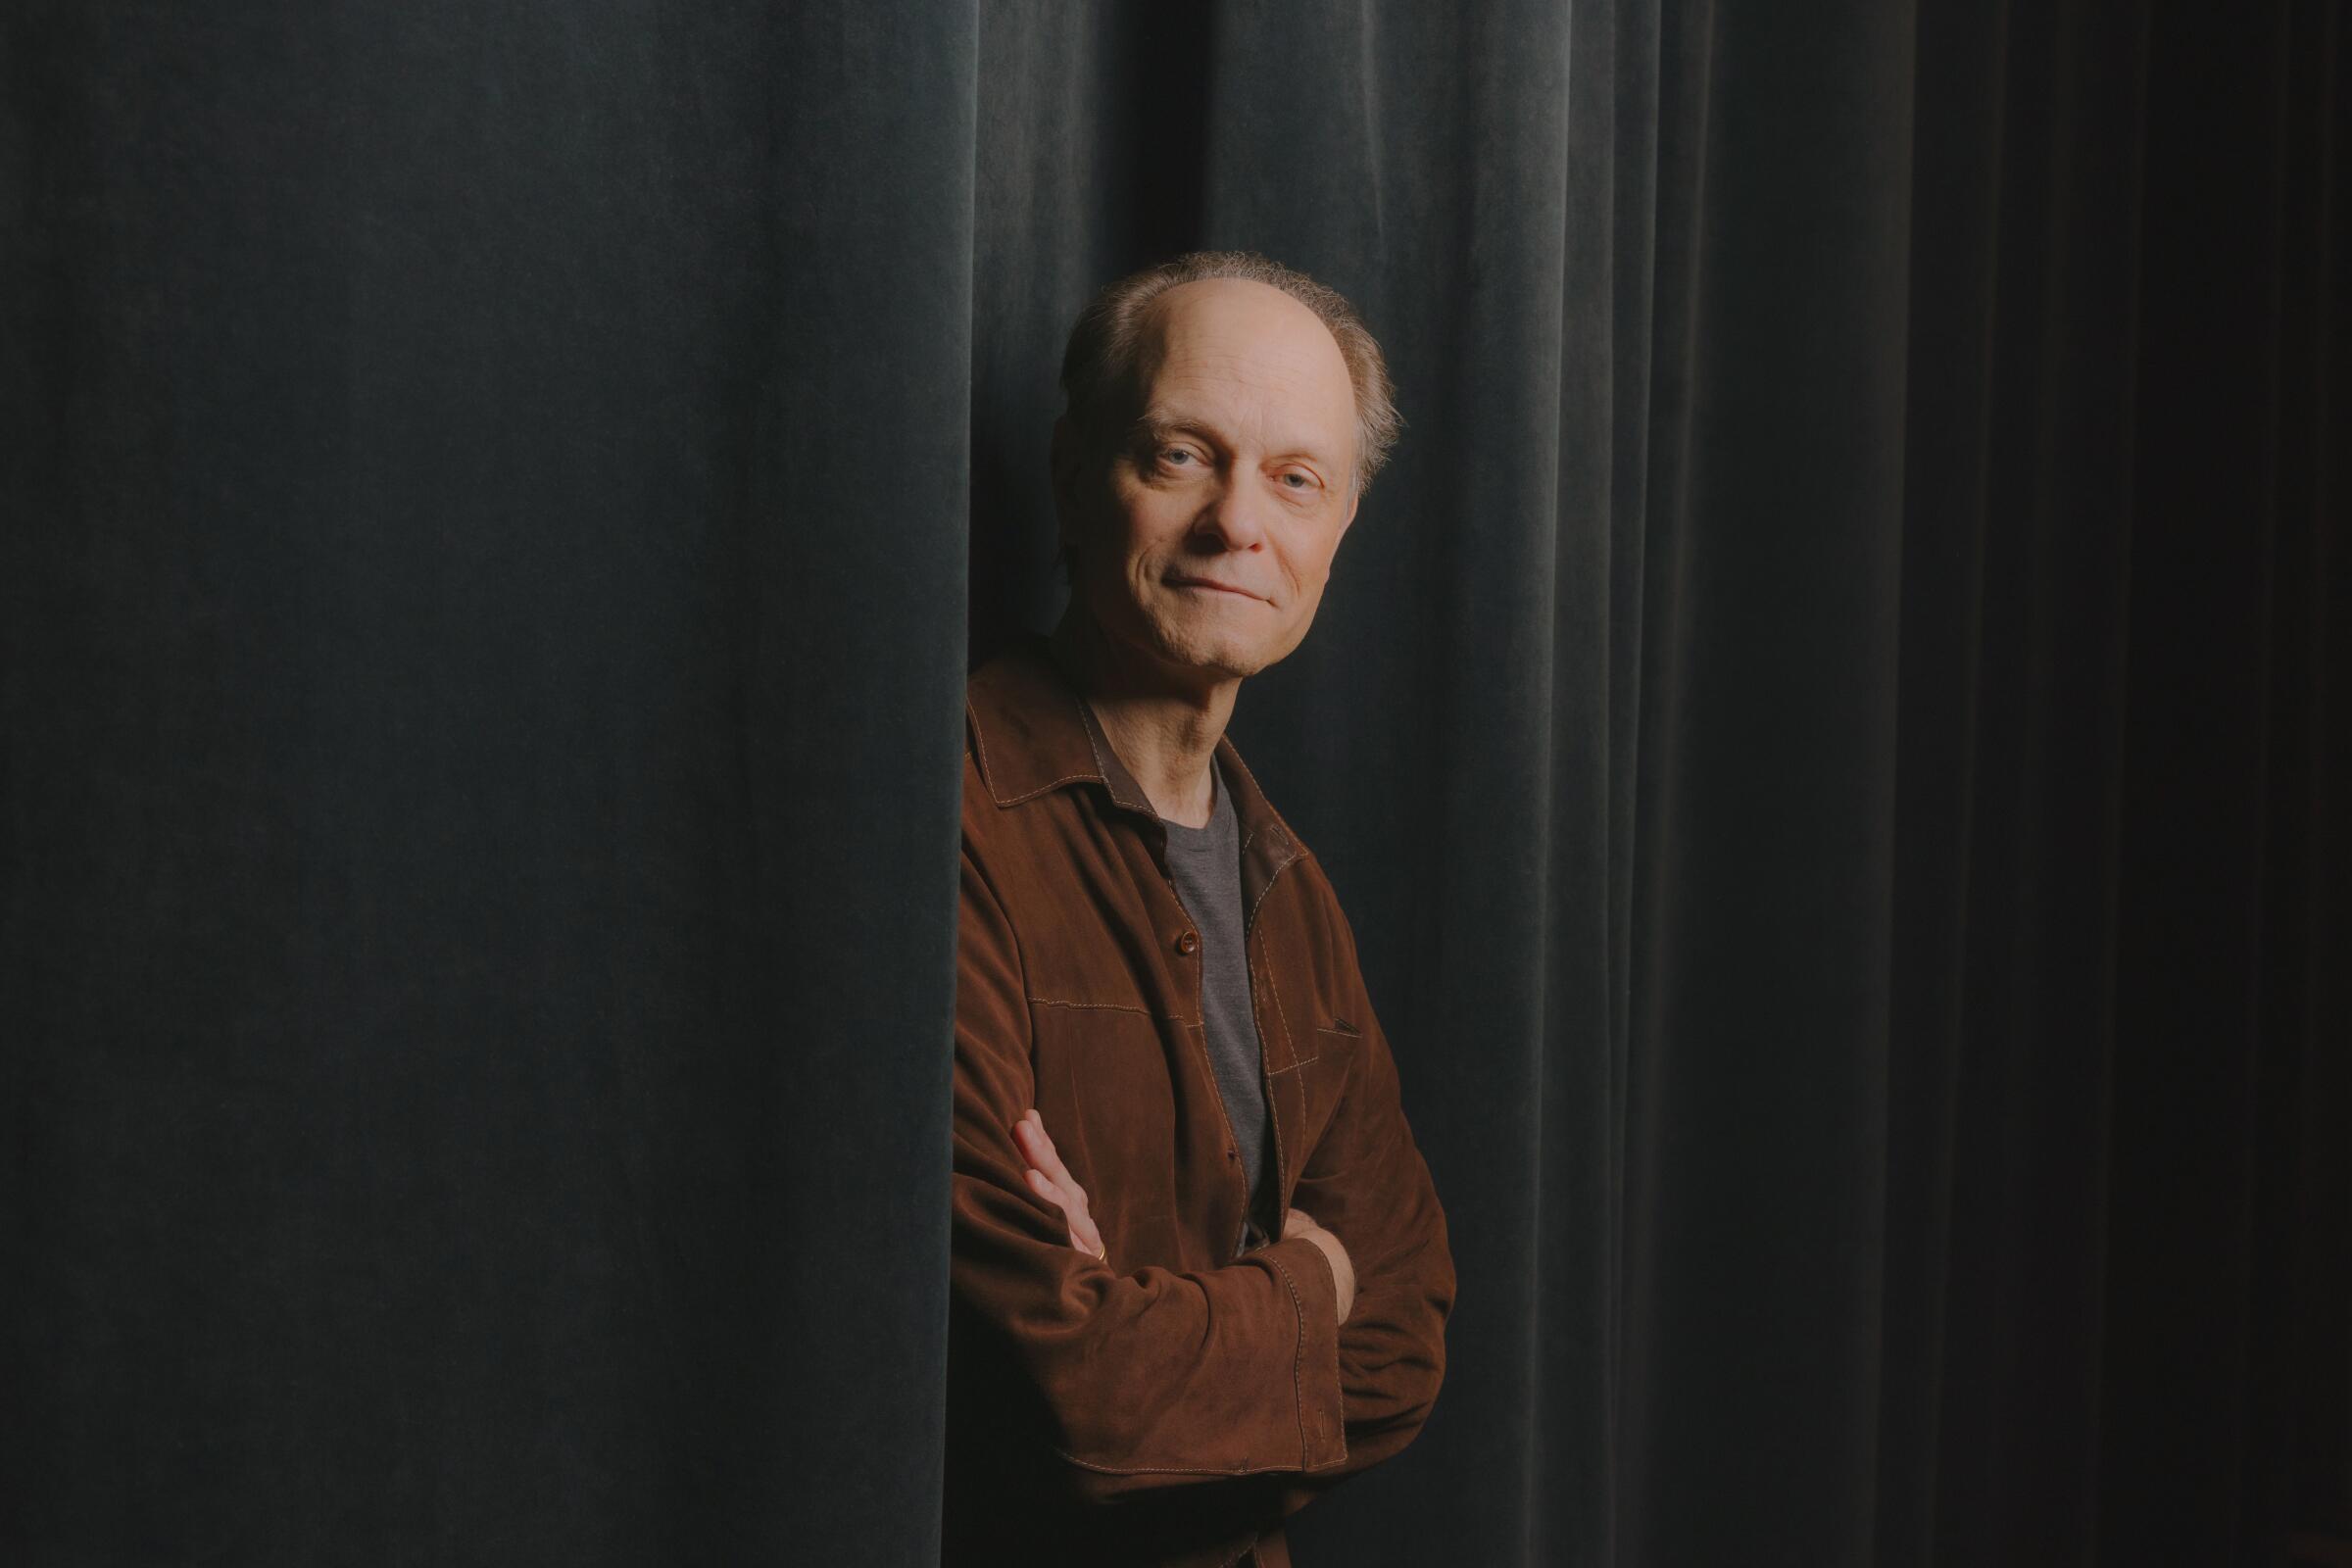 David Hyde Pierce at the Shed in New York.